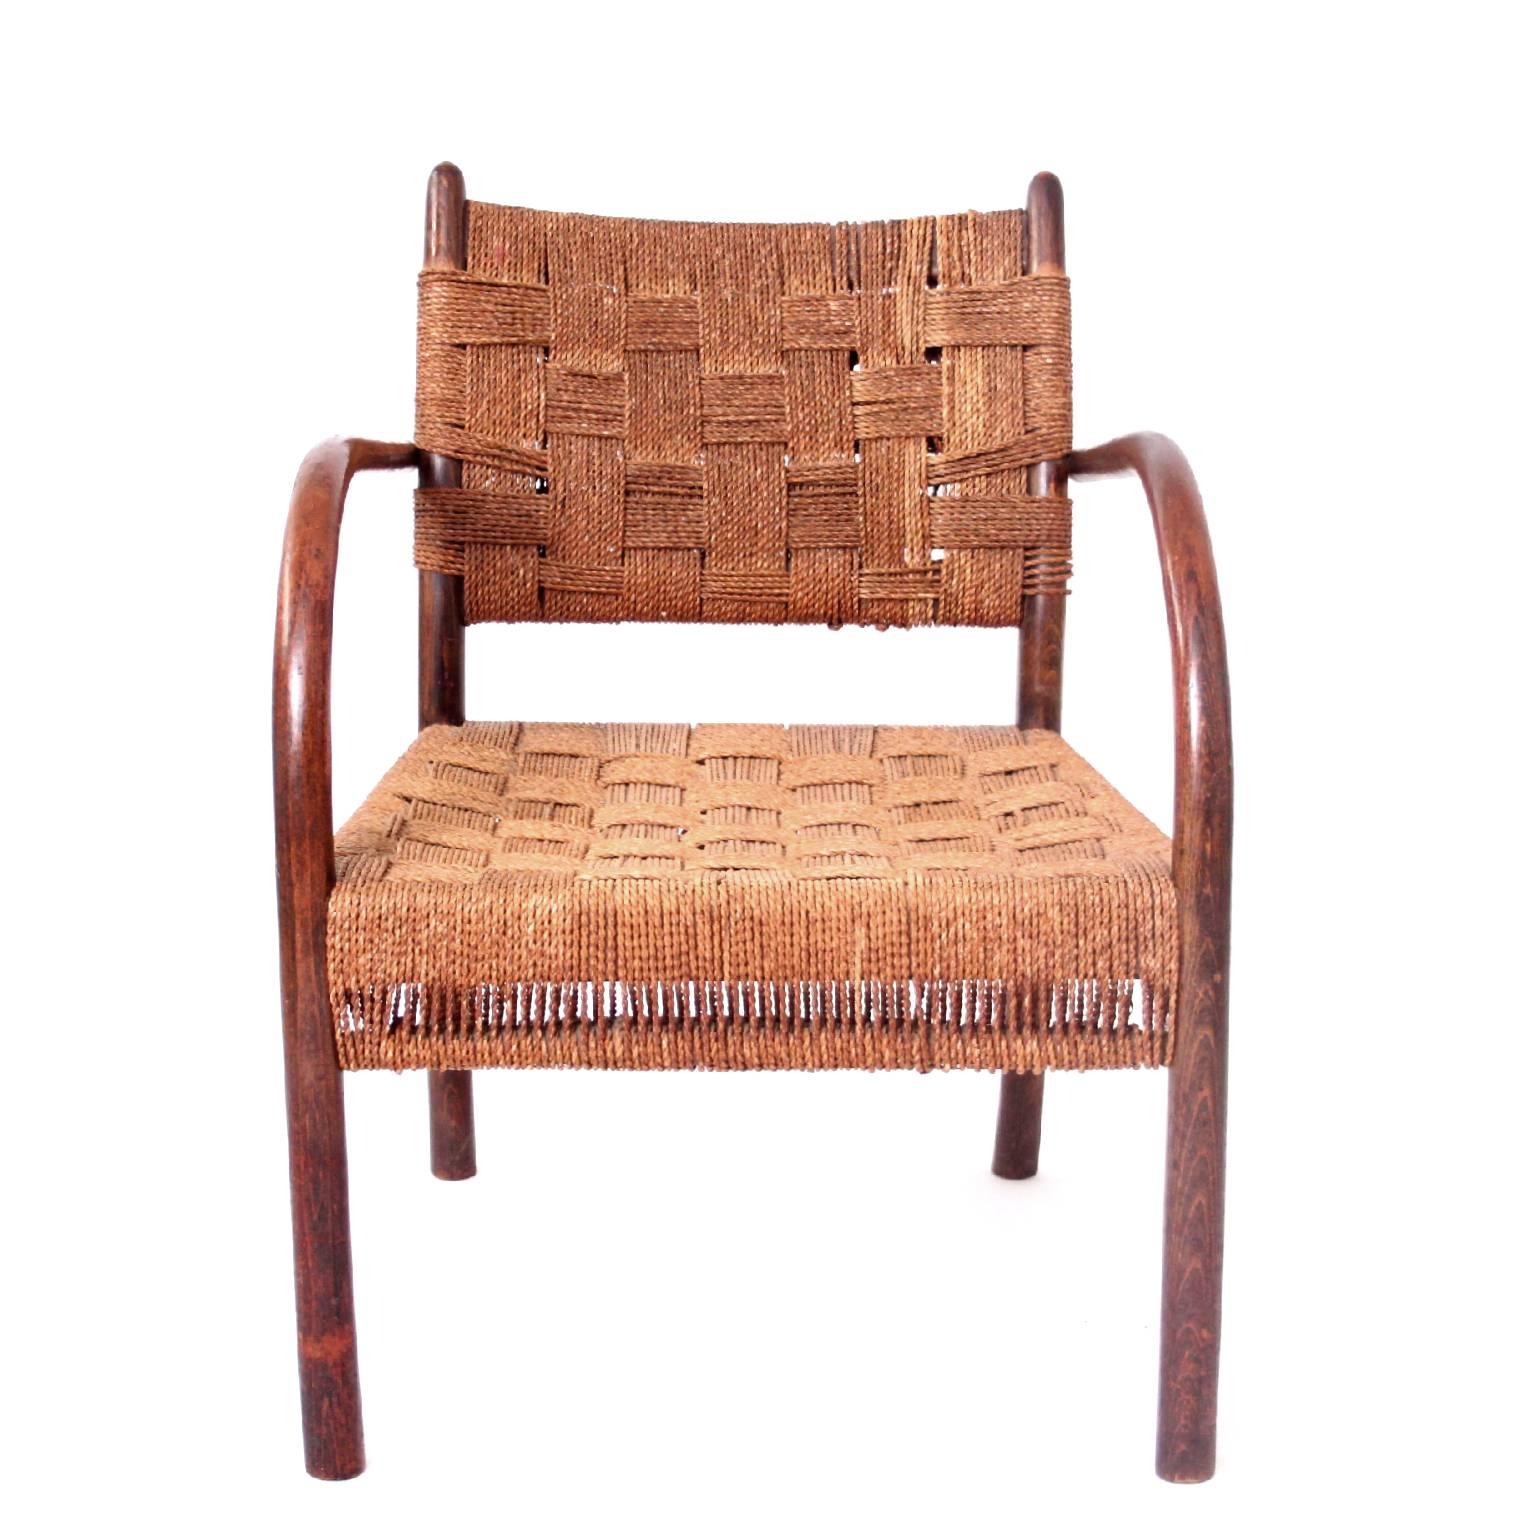 Armchair designed by Frits Schlegel, stained beech frame, seat and back upholstered with original woven sea grass. 

Manufactured by Fritz Hansen, Denmark, 1930s. 

Fine original vintage condition.